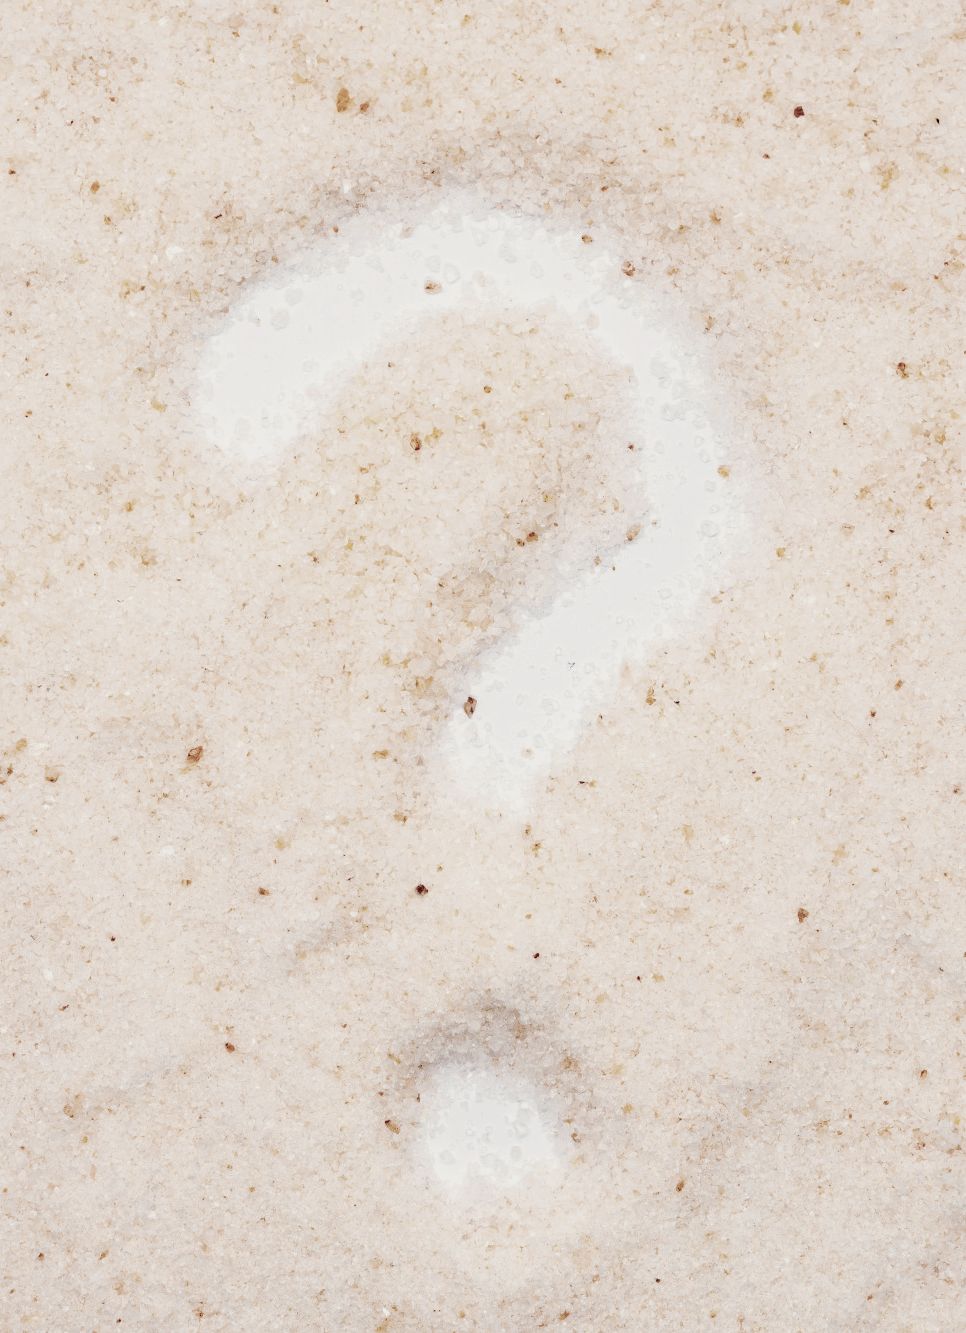 Question Mark in the sand on the beach